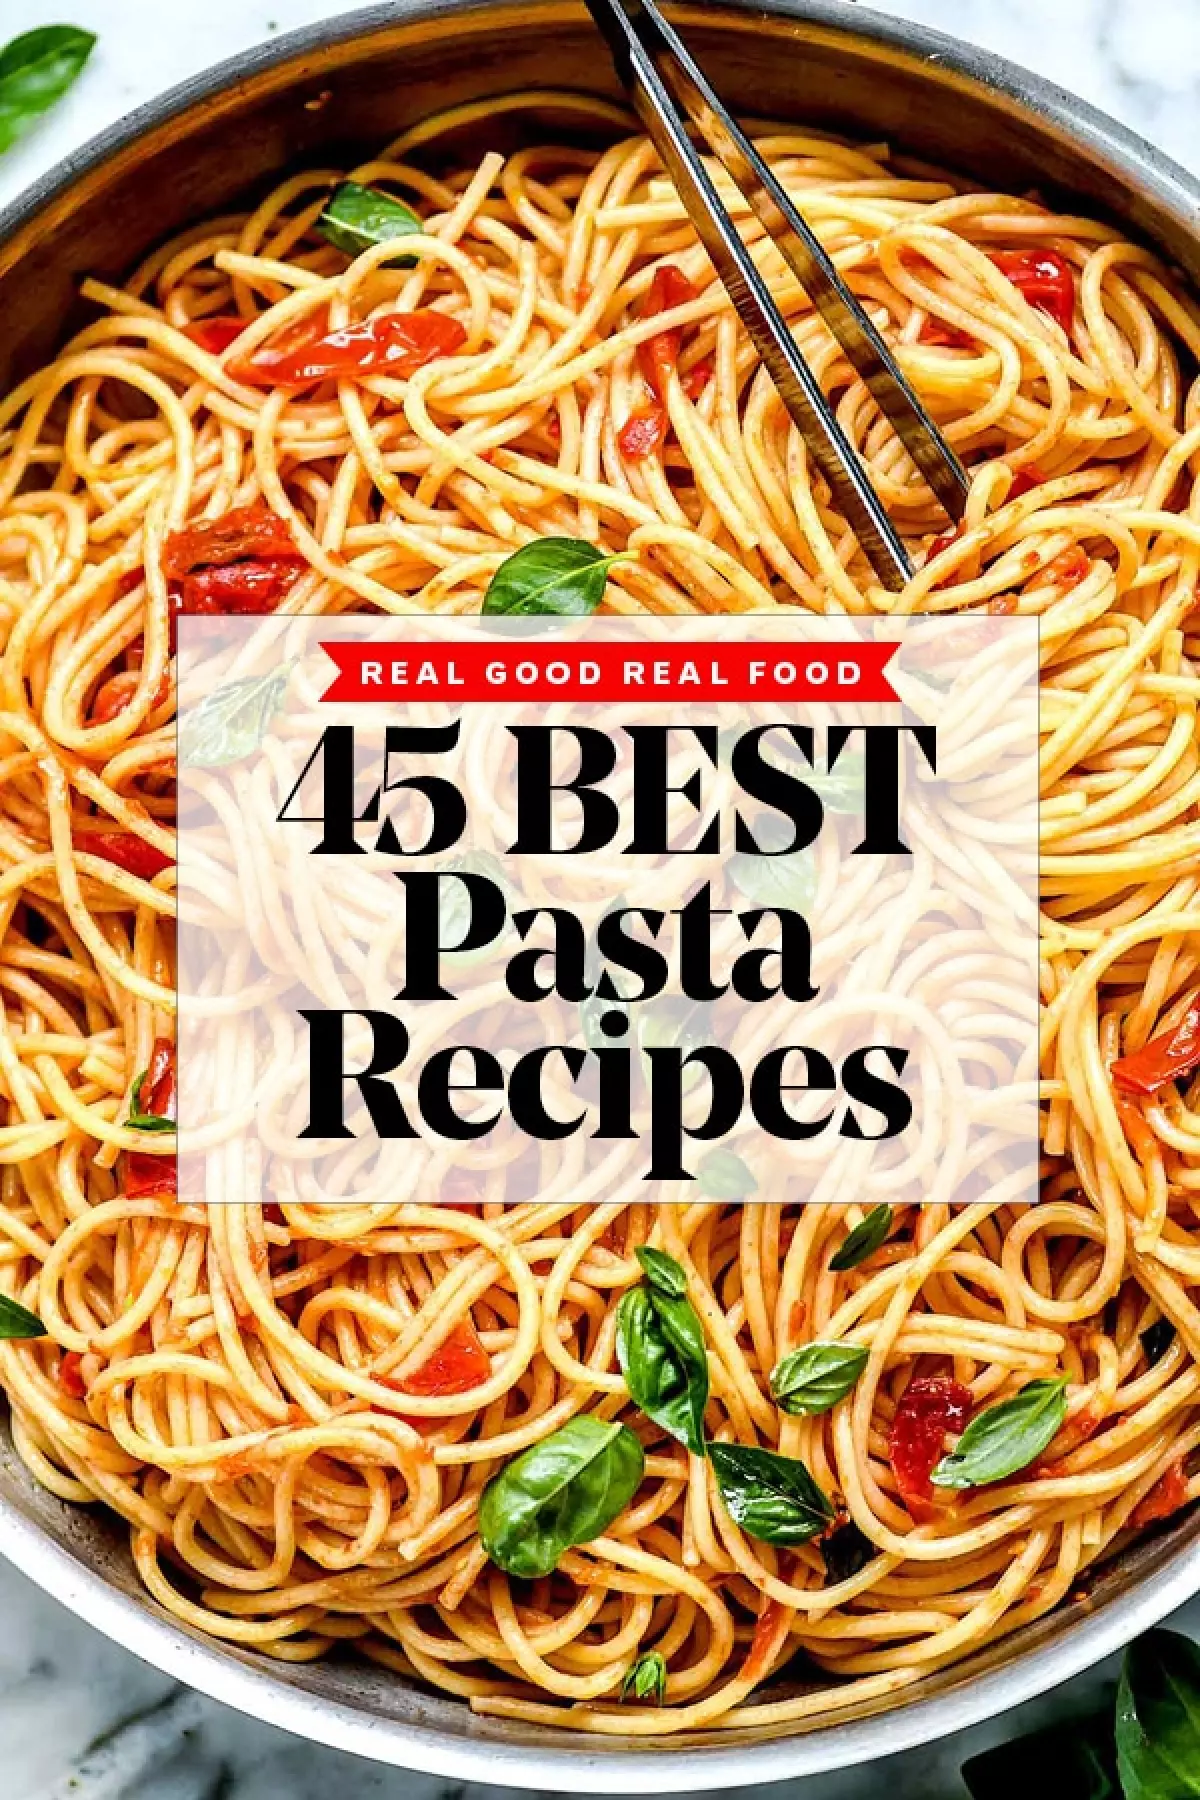 45 Best Pasta Recipes to Make Now